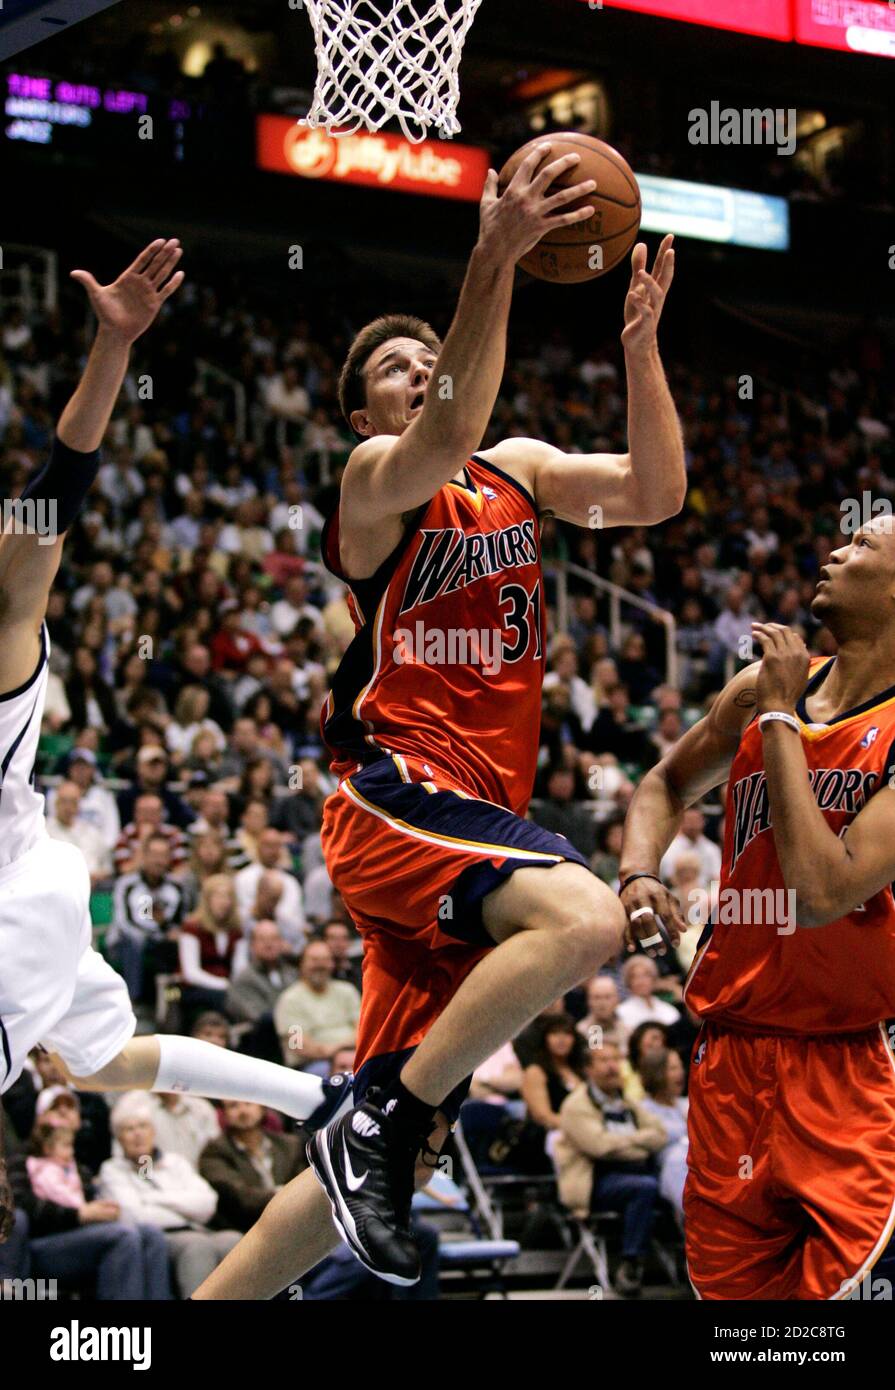 Golden State Warriors Rob Kurz goes up for a layup against the Utah Jazz  during the first half of their NBA basketball game in Salt Lake City, Utah,  April 11, 2009. REUTERS/Ramin